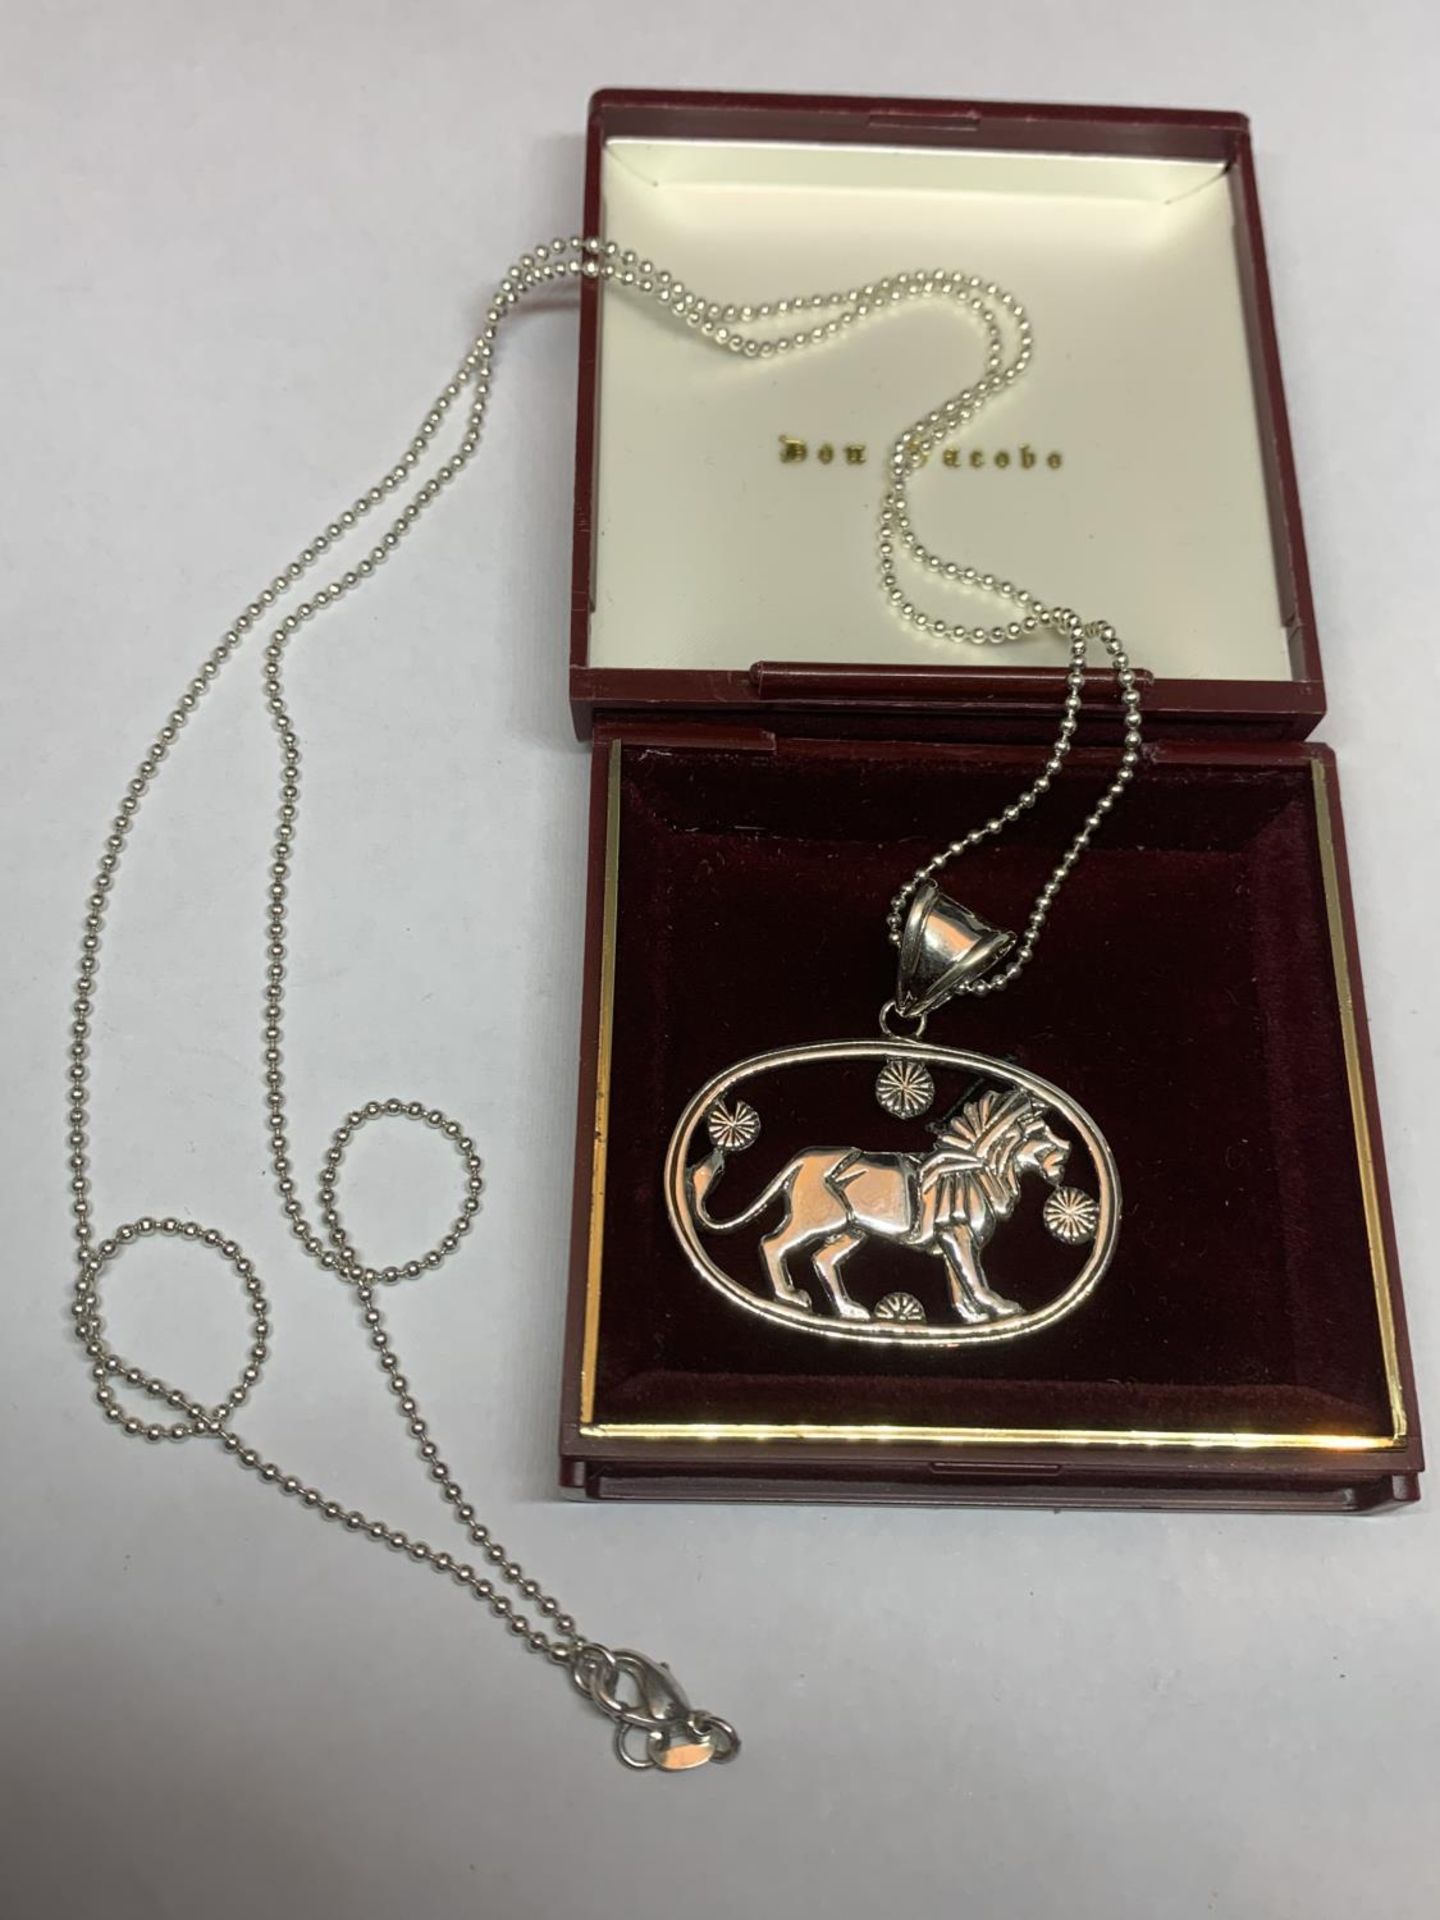 A SILVER NECKLACE WITH A LION PENDANT IN A PRESENTATION BOX